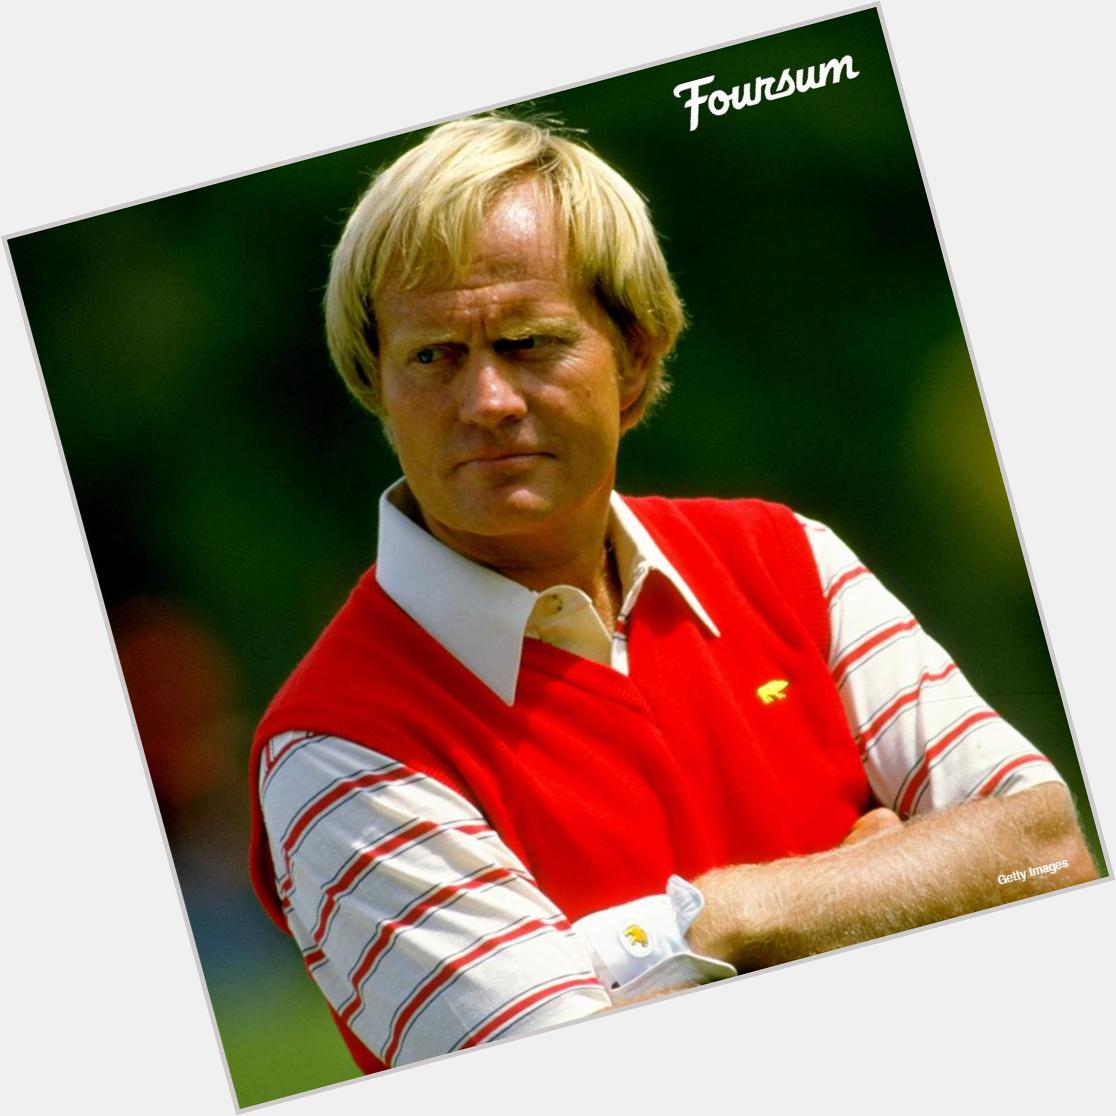 The Golden Bear, Jack Nicklaus, turns 75 today. Happy birthday, Jack! 